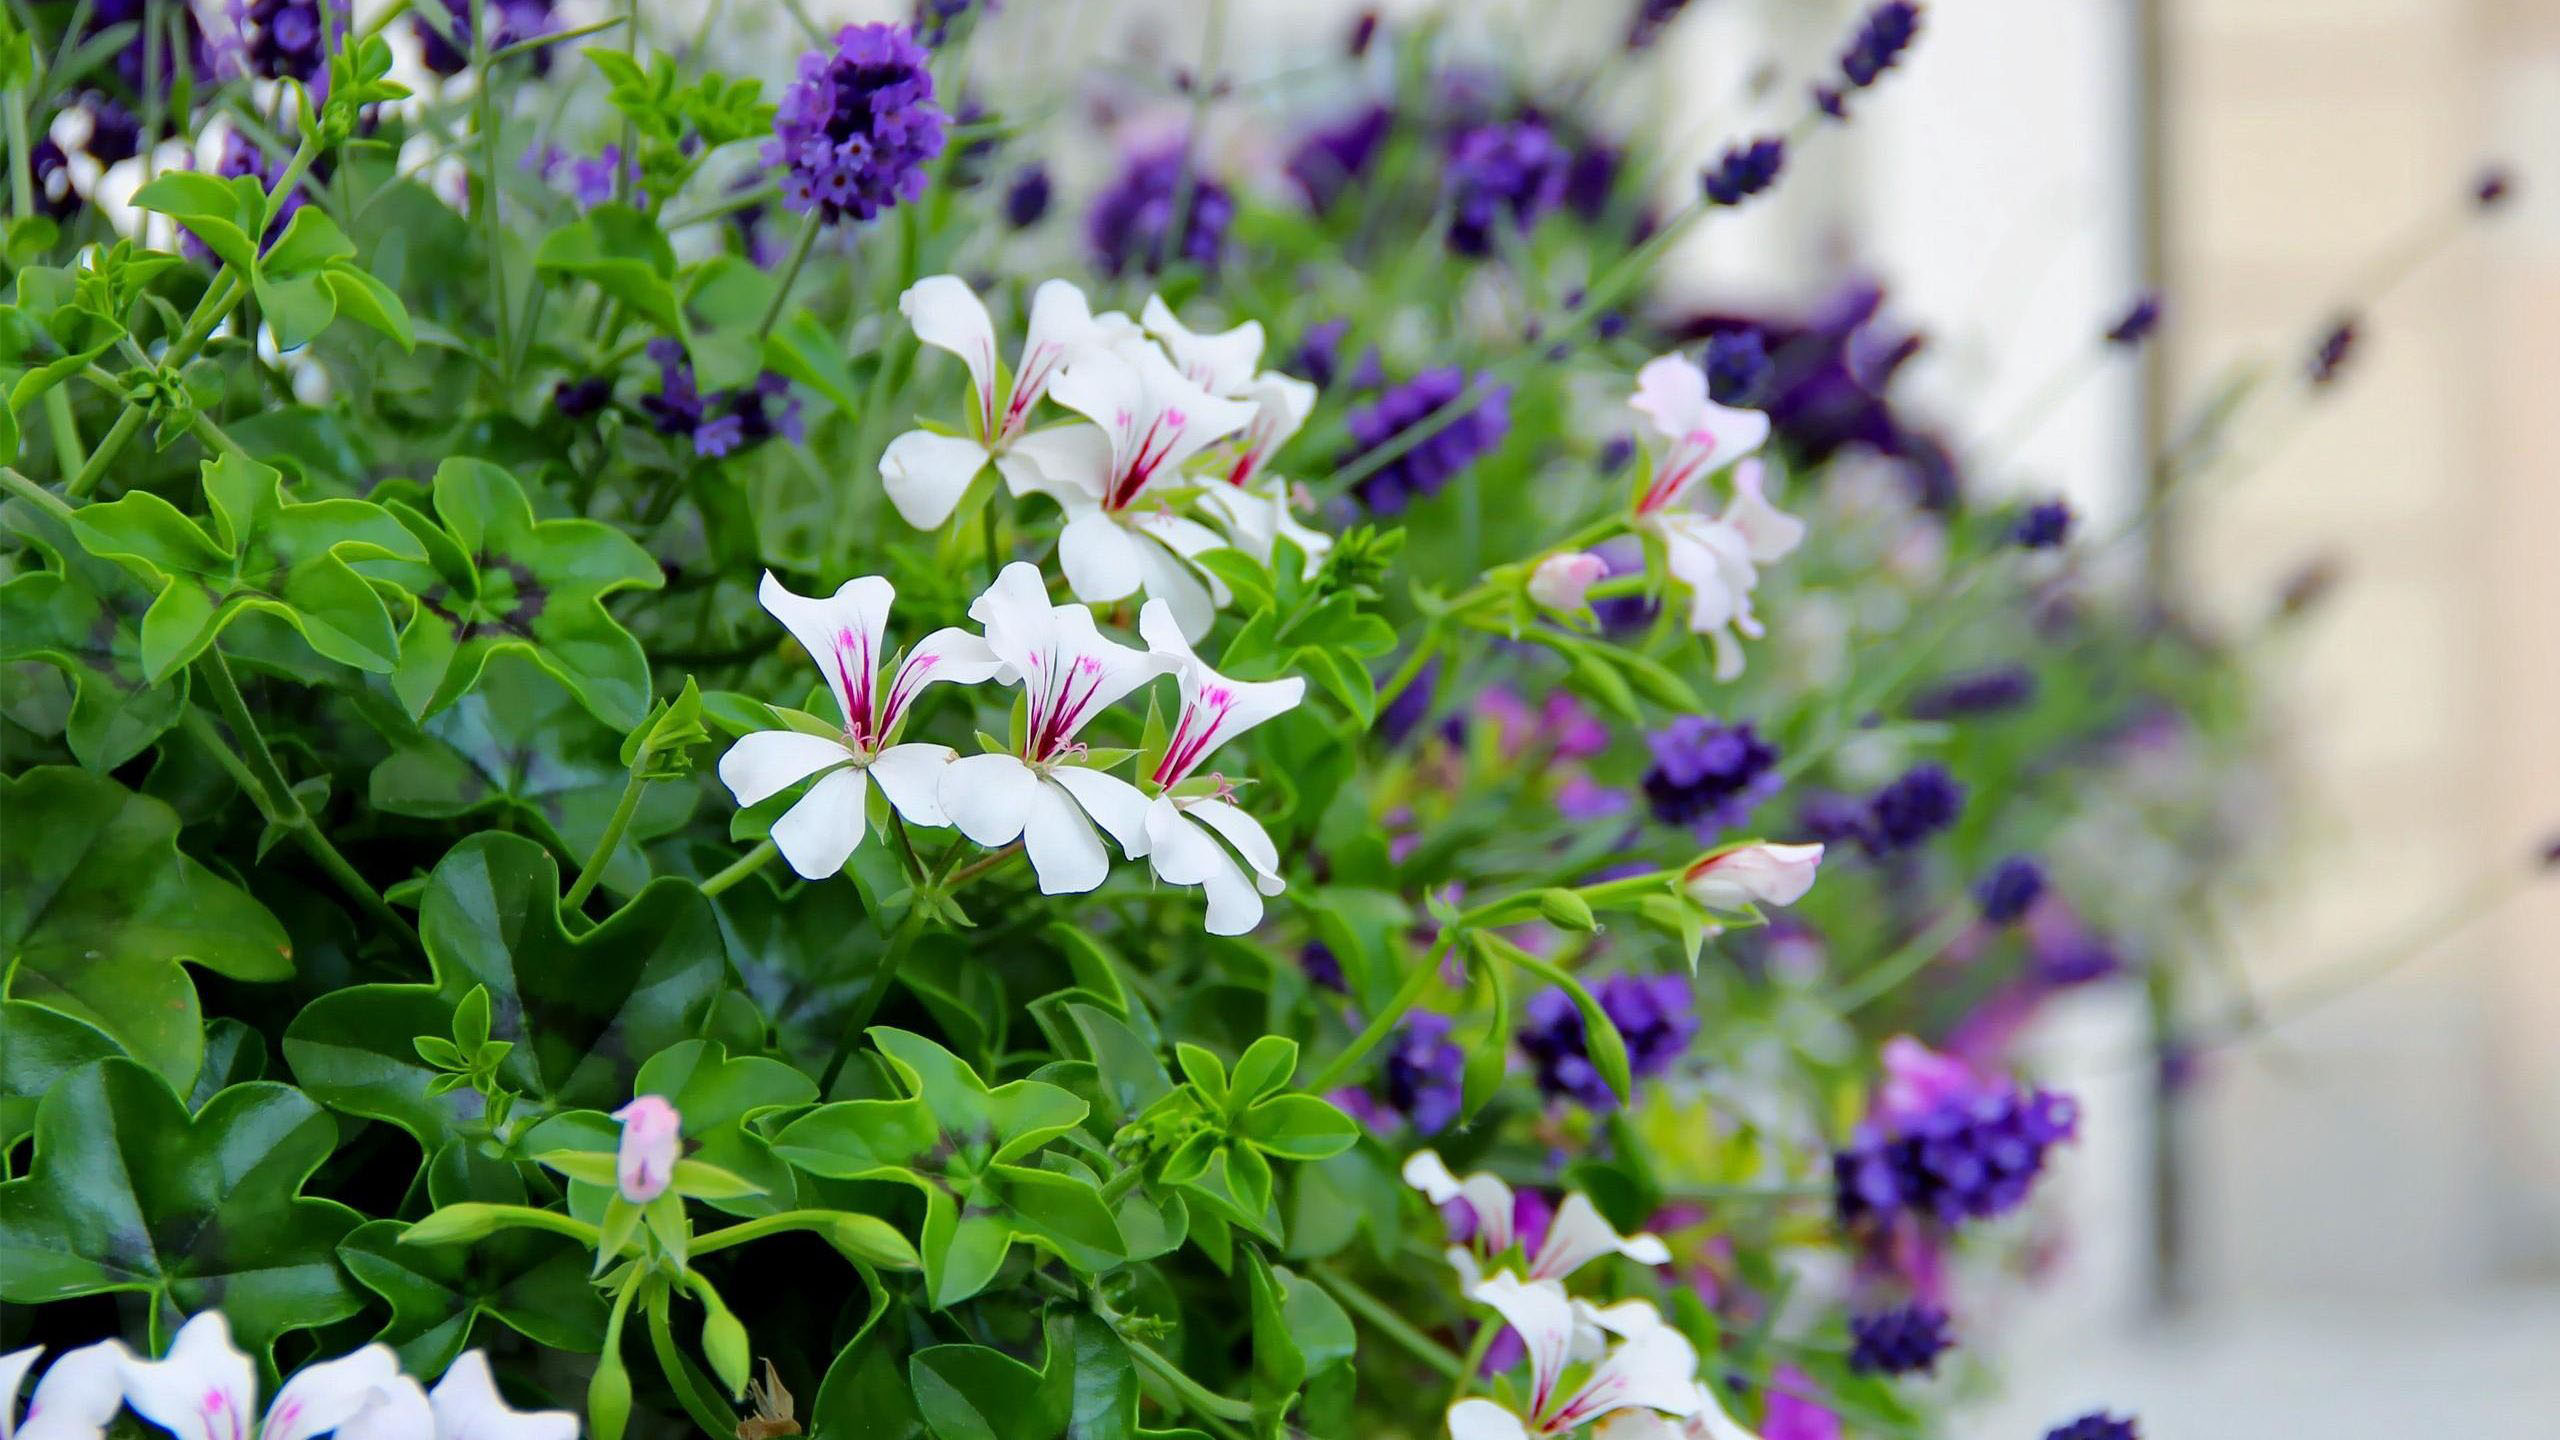 Closesup View Of White Flowers Green Leaves Buds Purple Flowers Blur Wallpaper 2K Flowers